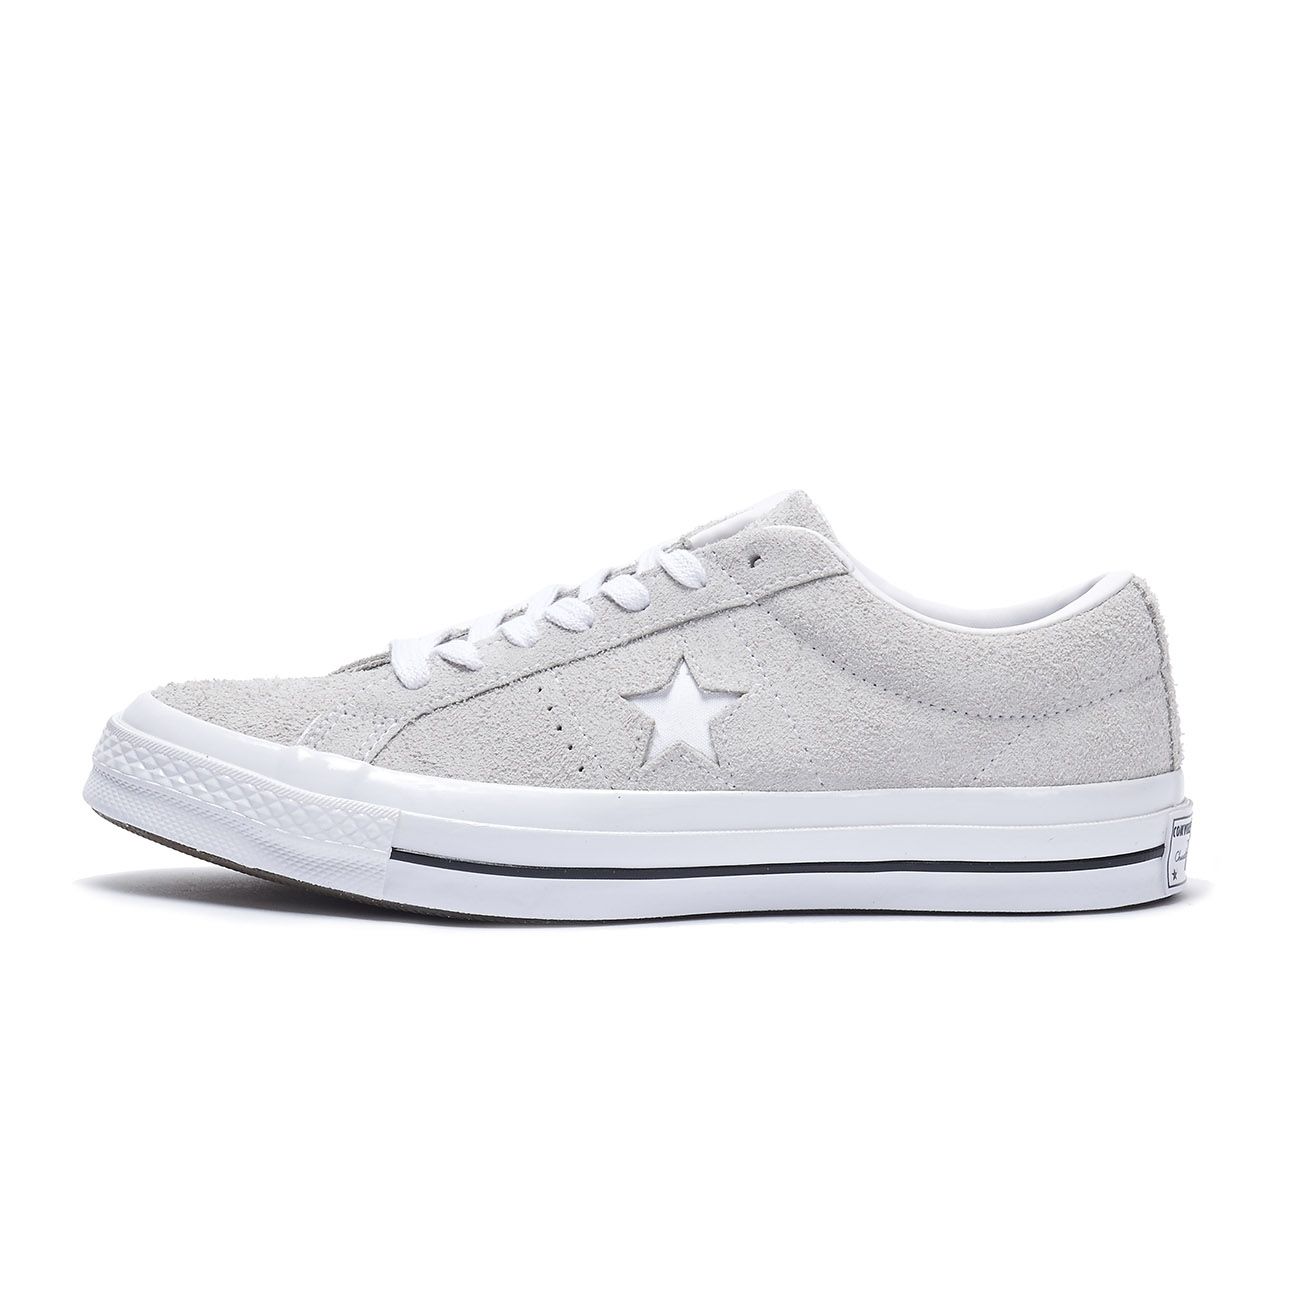 converse one star suede ox sneaker